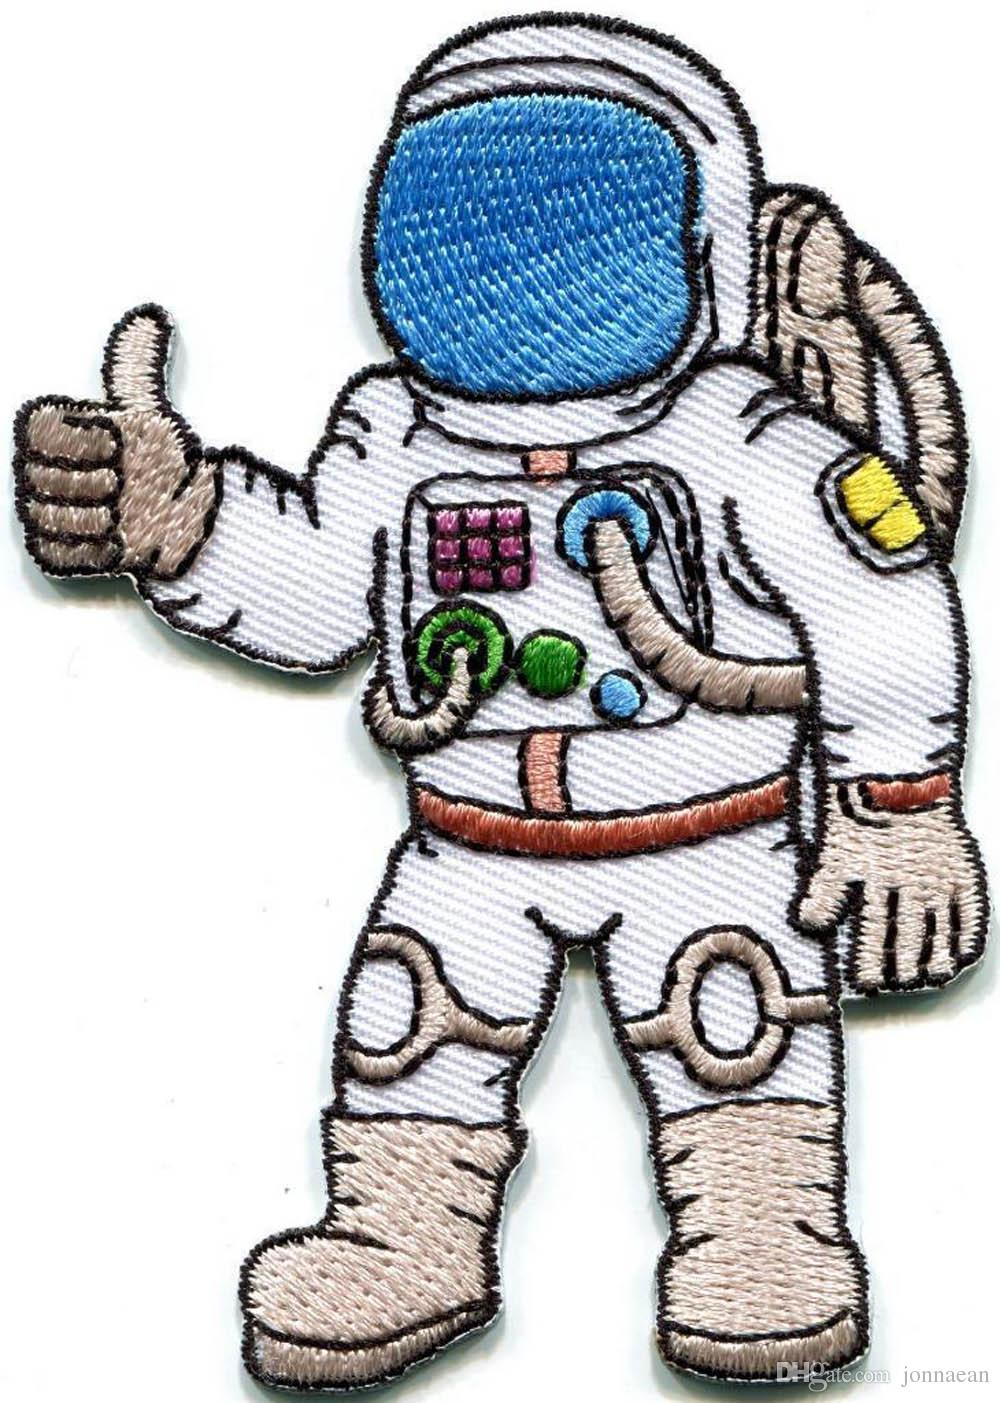 Embroidery Patterns For Sale Hot Sale Custom Embroidery Design Astronaut Cosmonaut Spaceman Retro Embroidered Applique Iron On Patch New Style Free Shipping